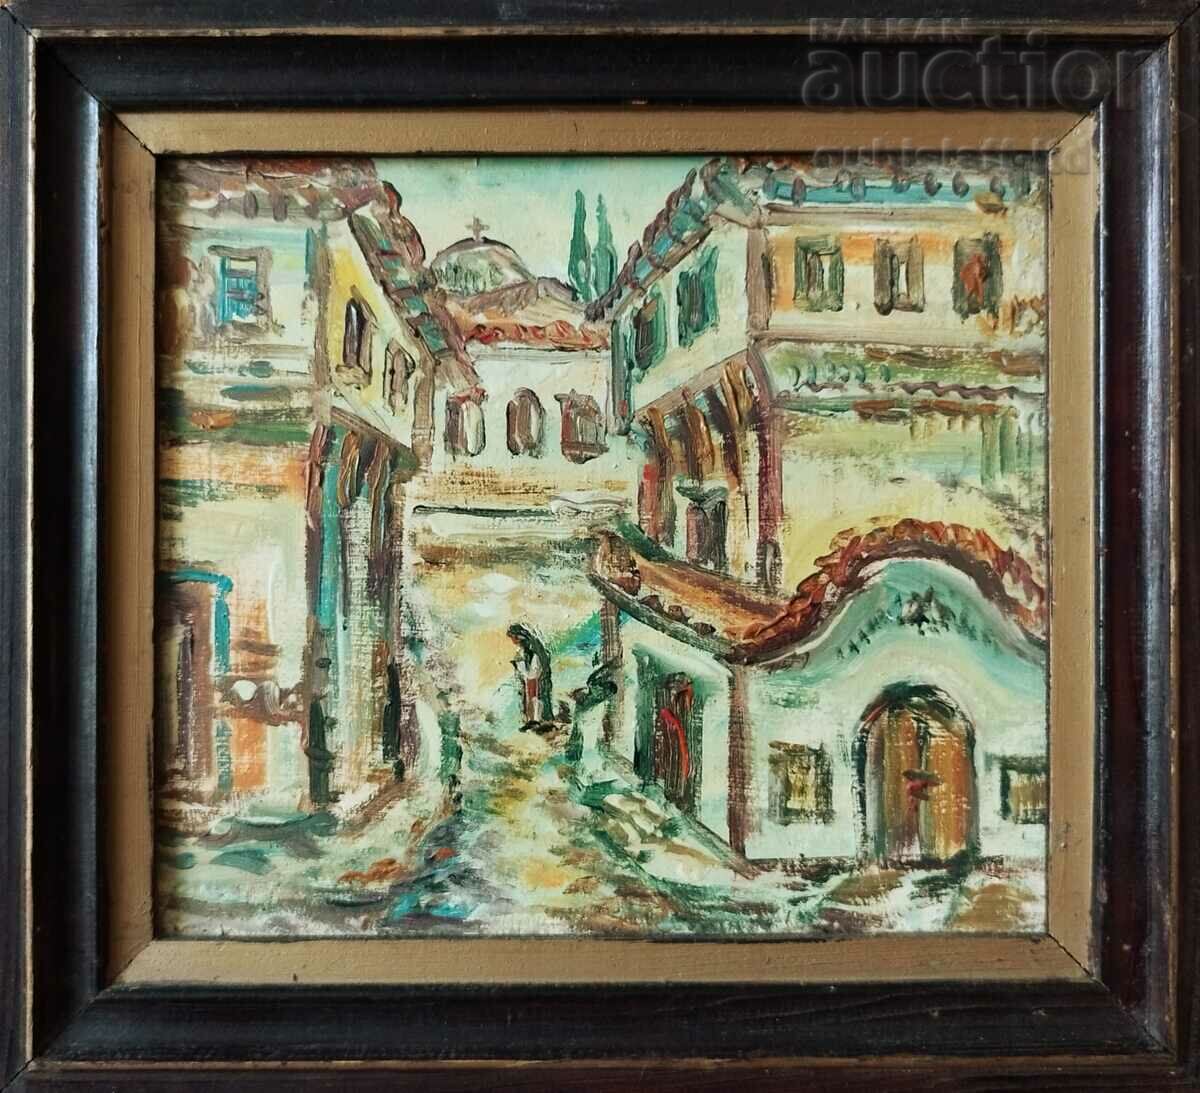 Painting, "View from Plovdiv", art. M. Mihailov, 1986